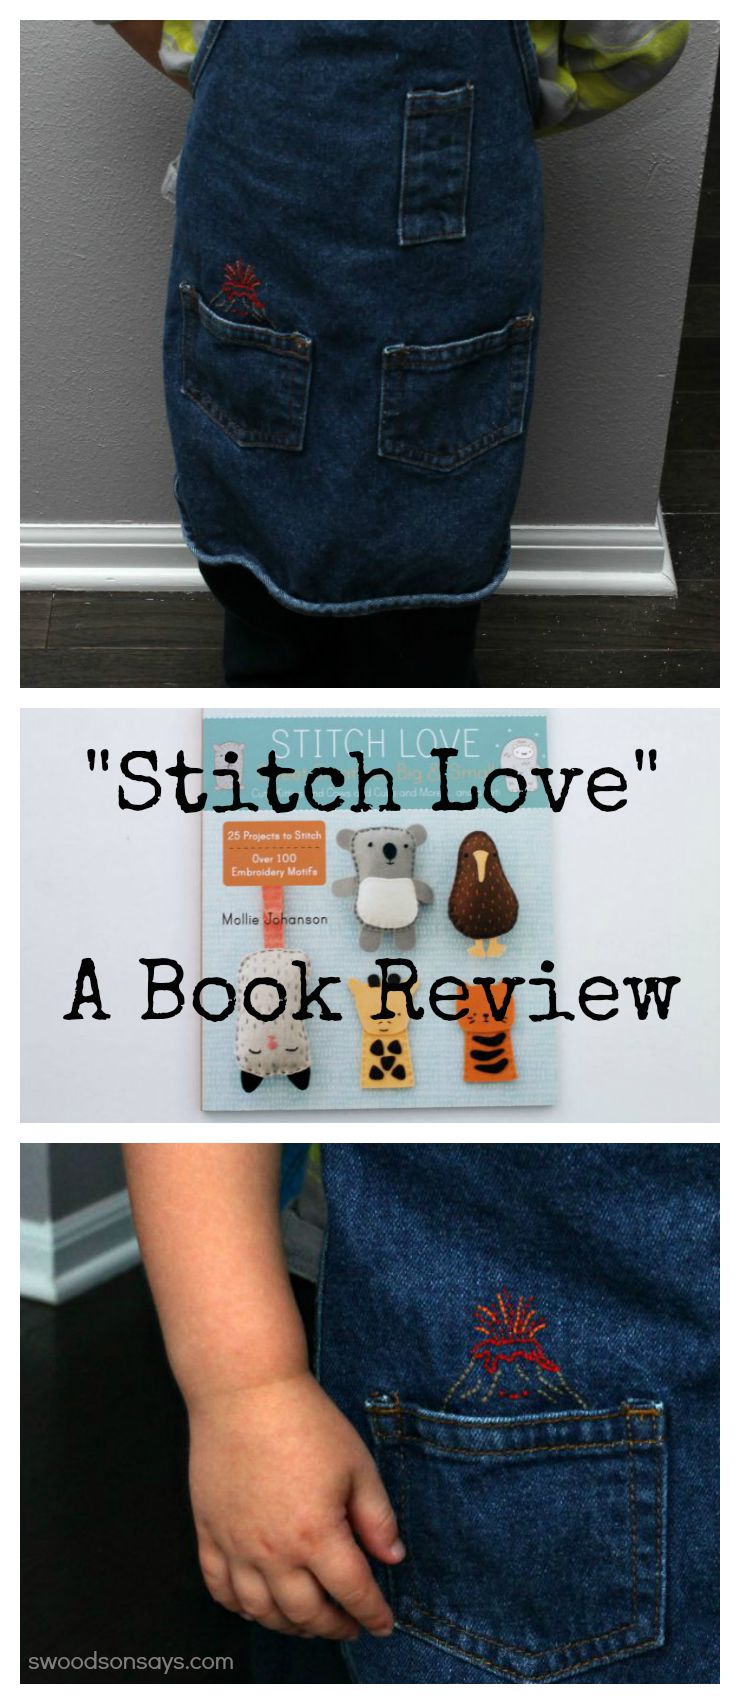 Stitch Love by Mollie Johanson - an embroidery book review on Swoodsonsays.com